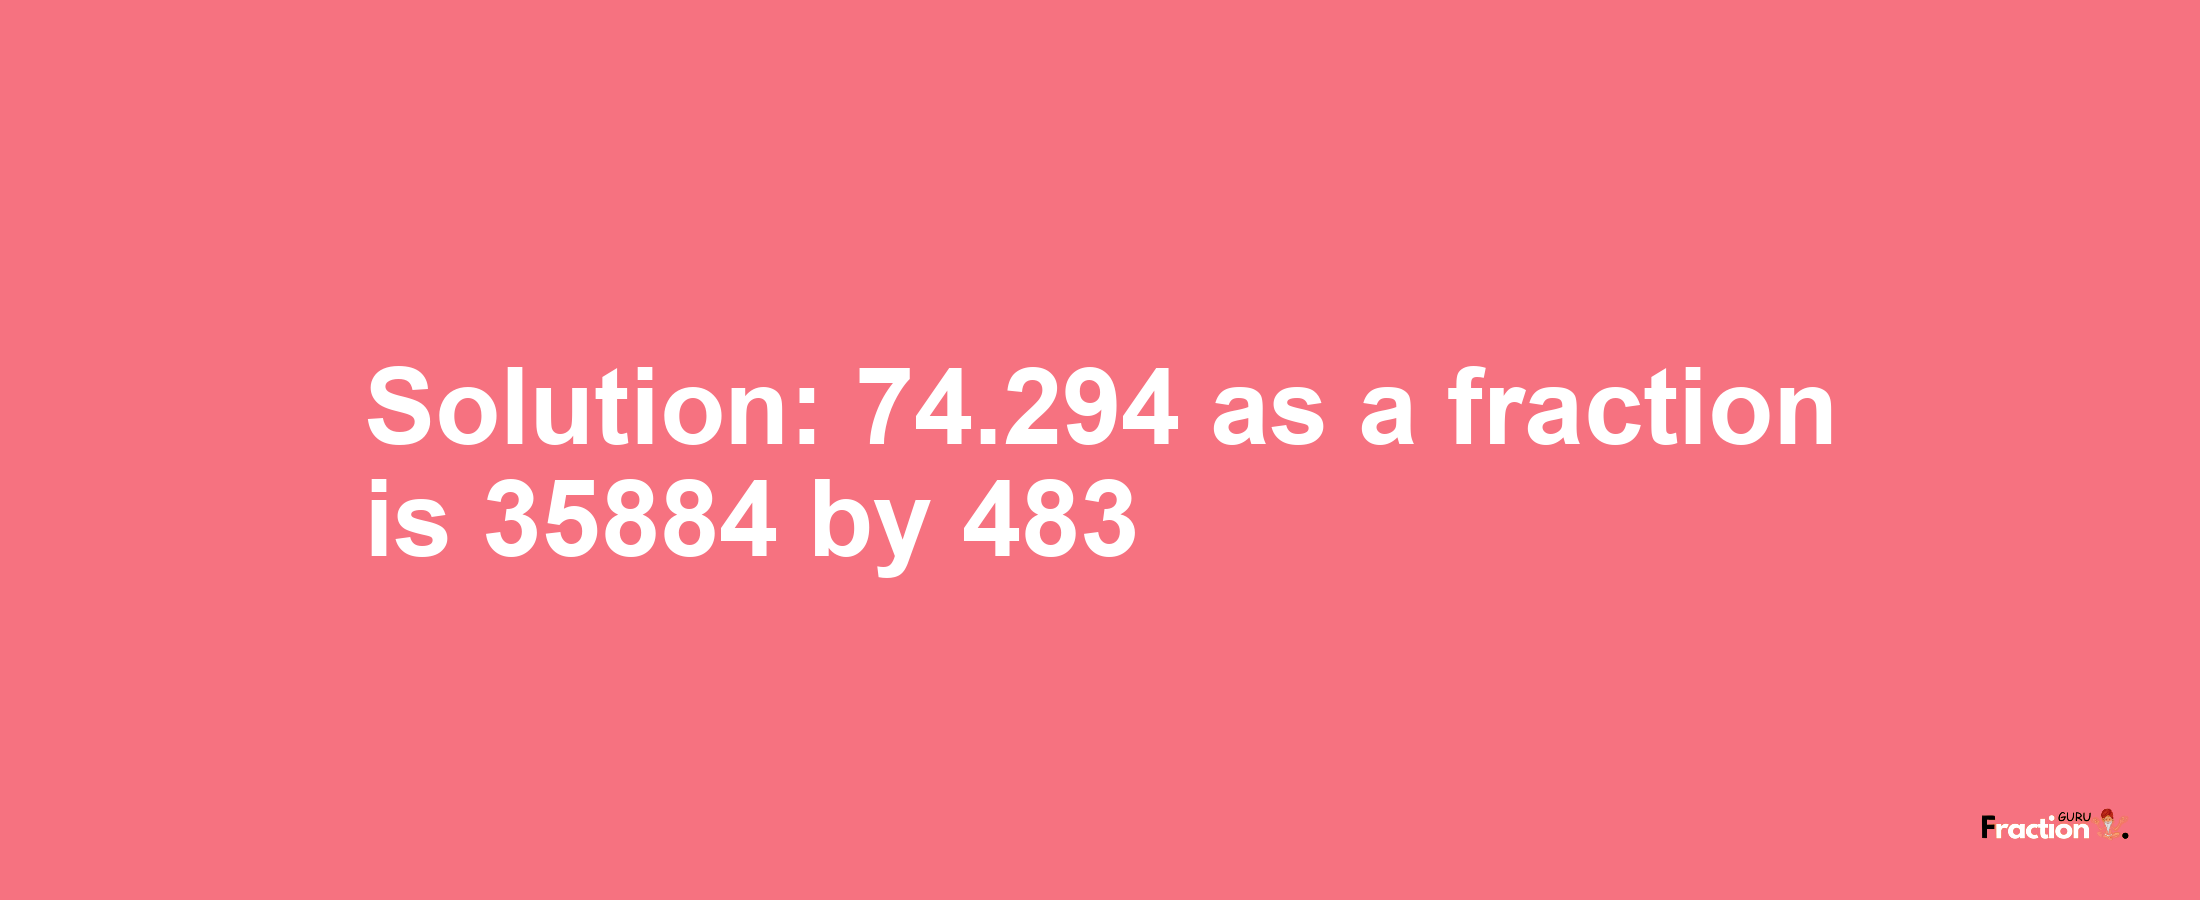 Solution:74.294 as a fraction is 35884/483